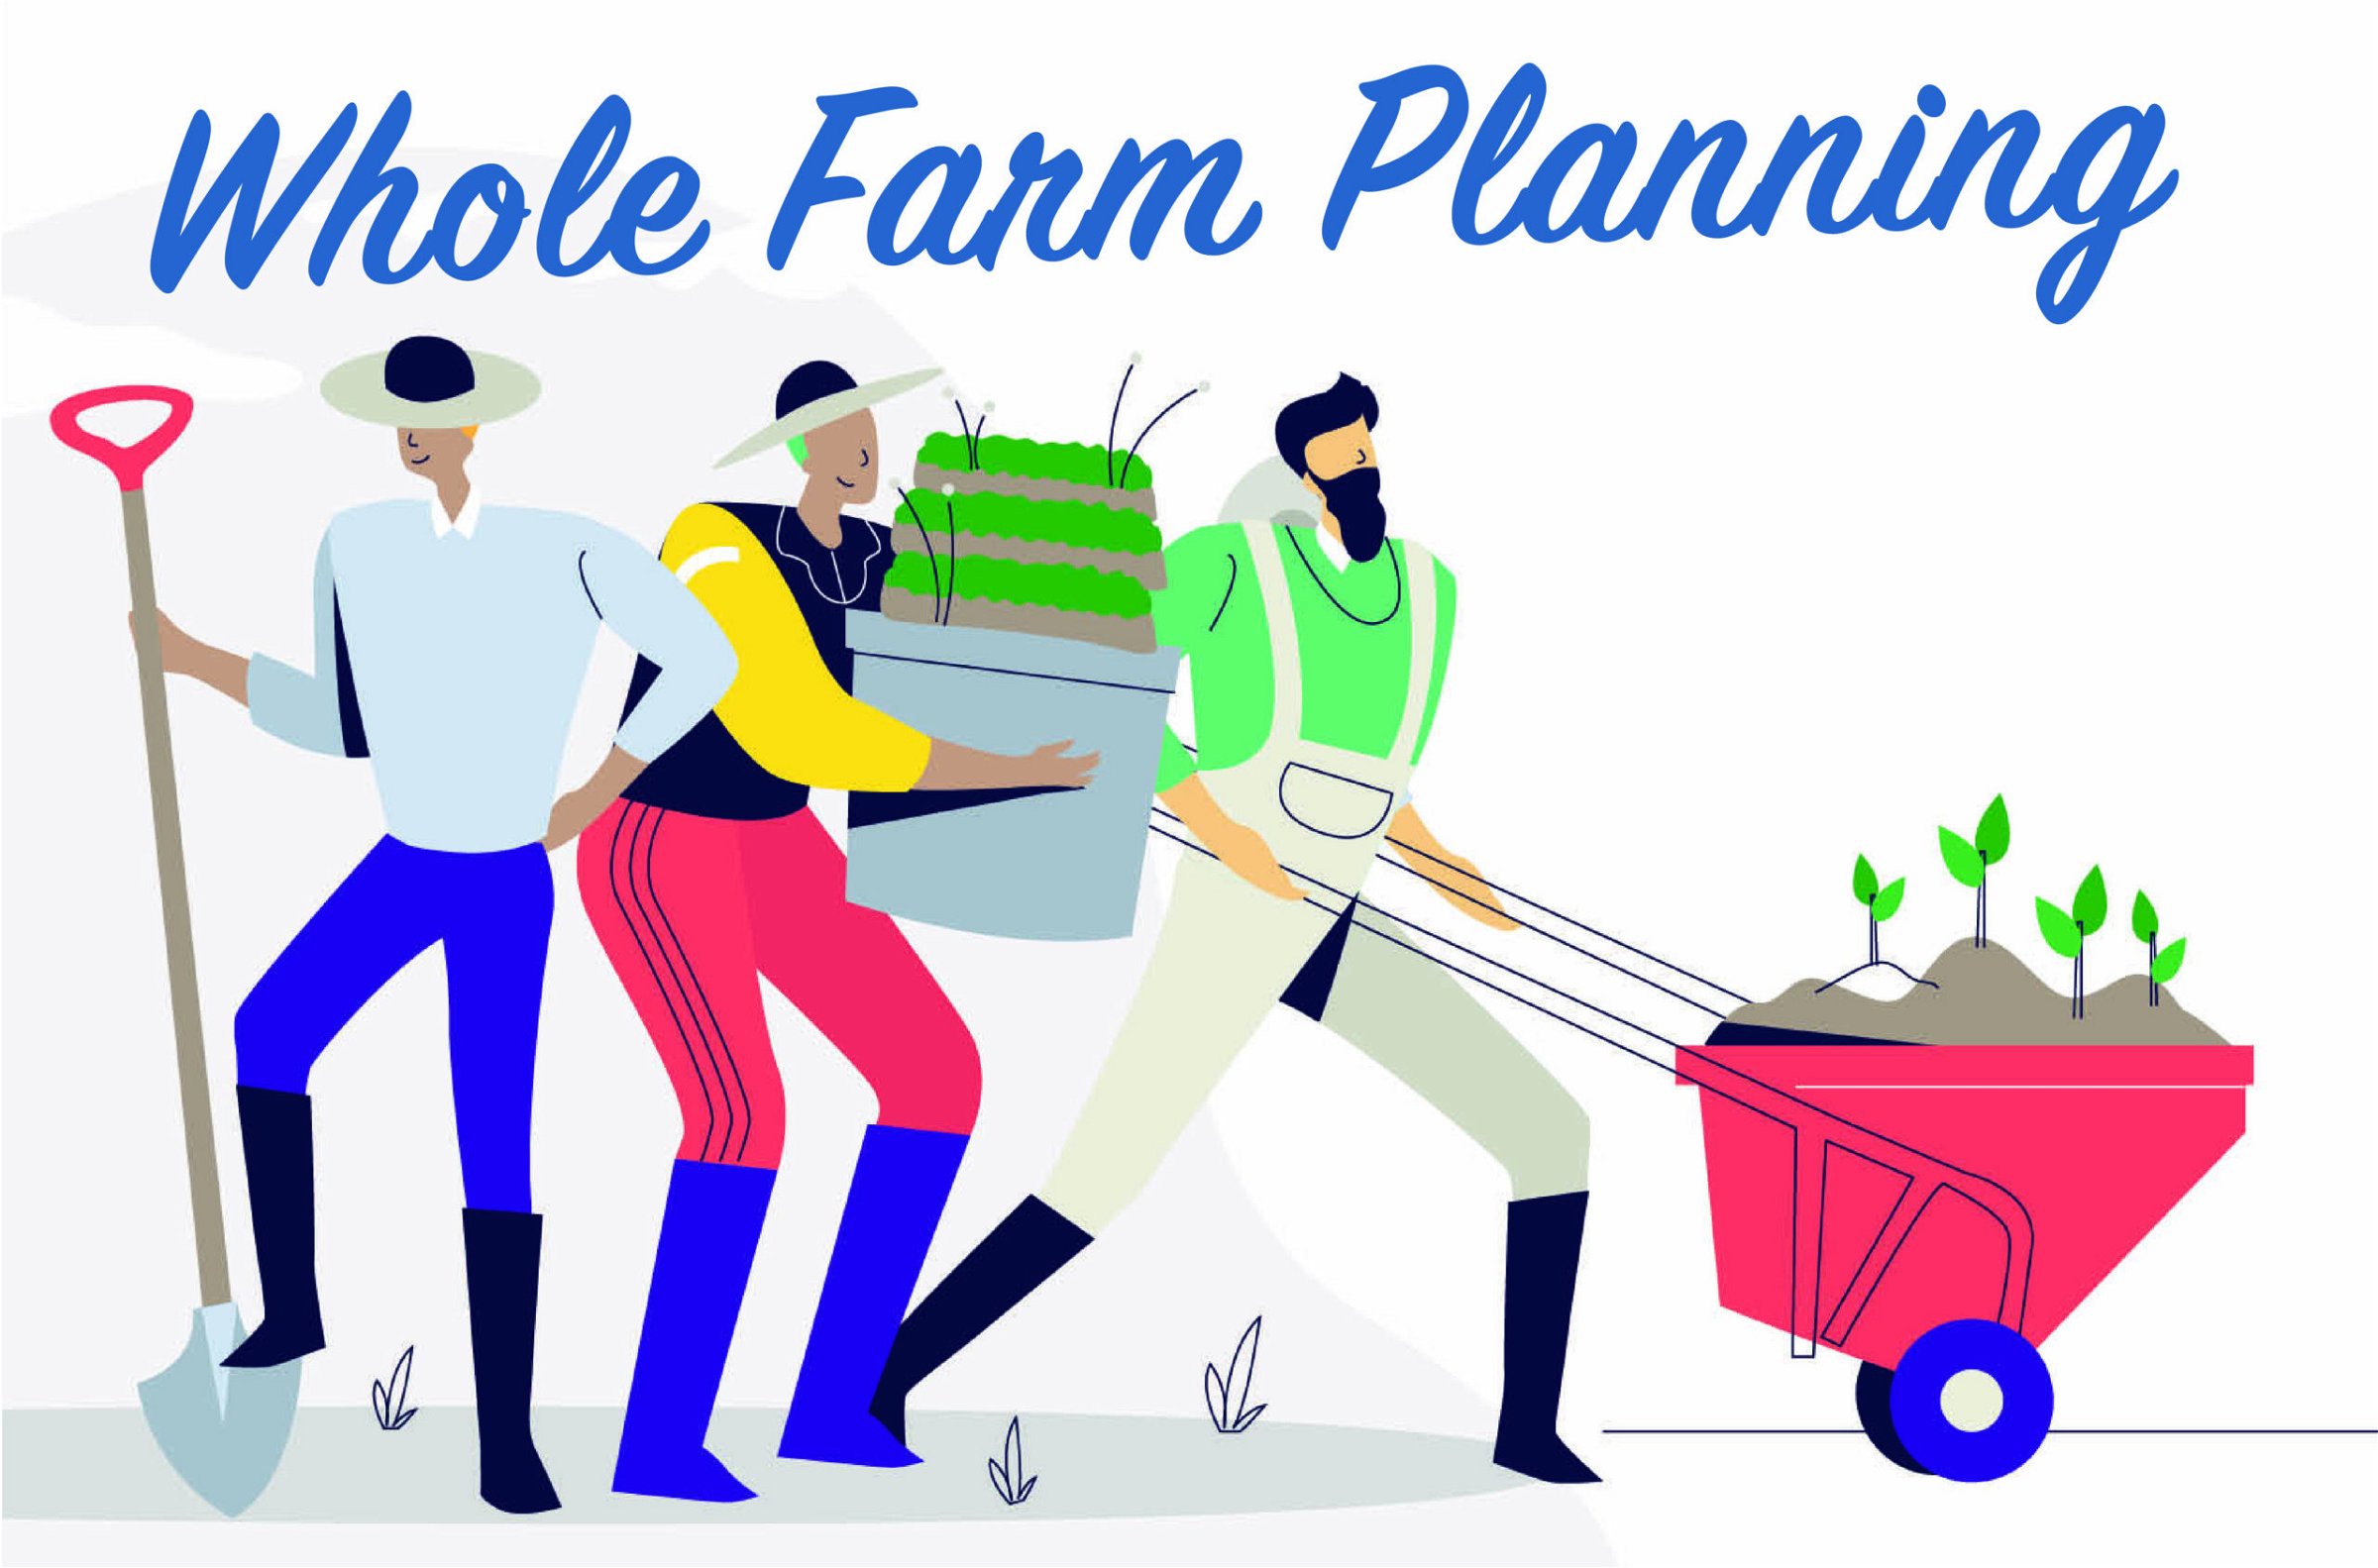 Register Now for Farm Planning course